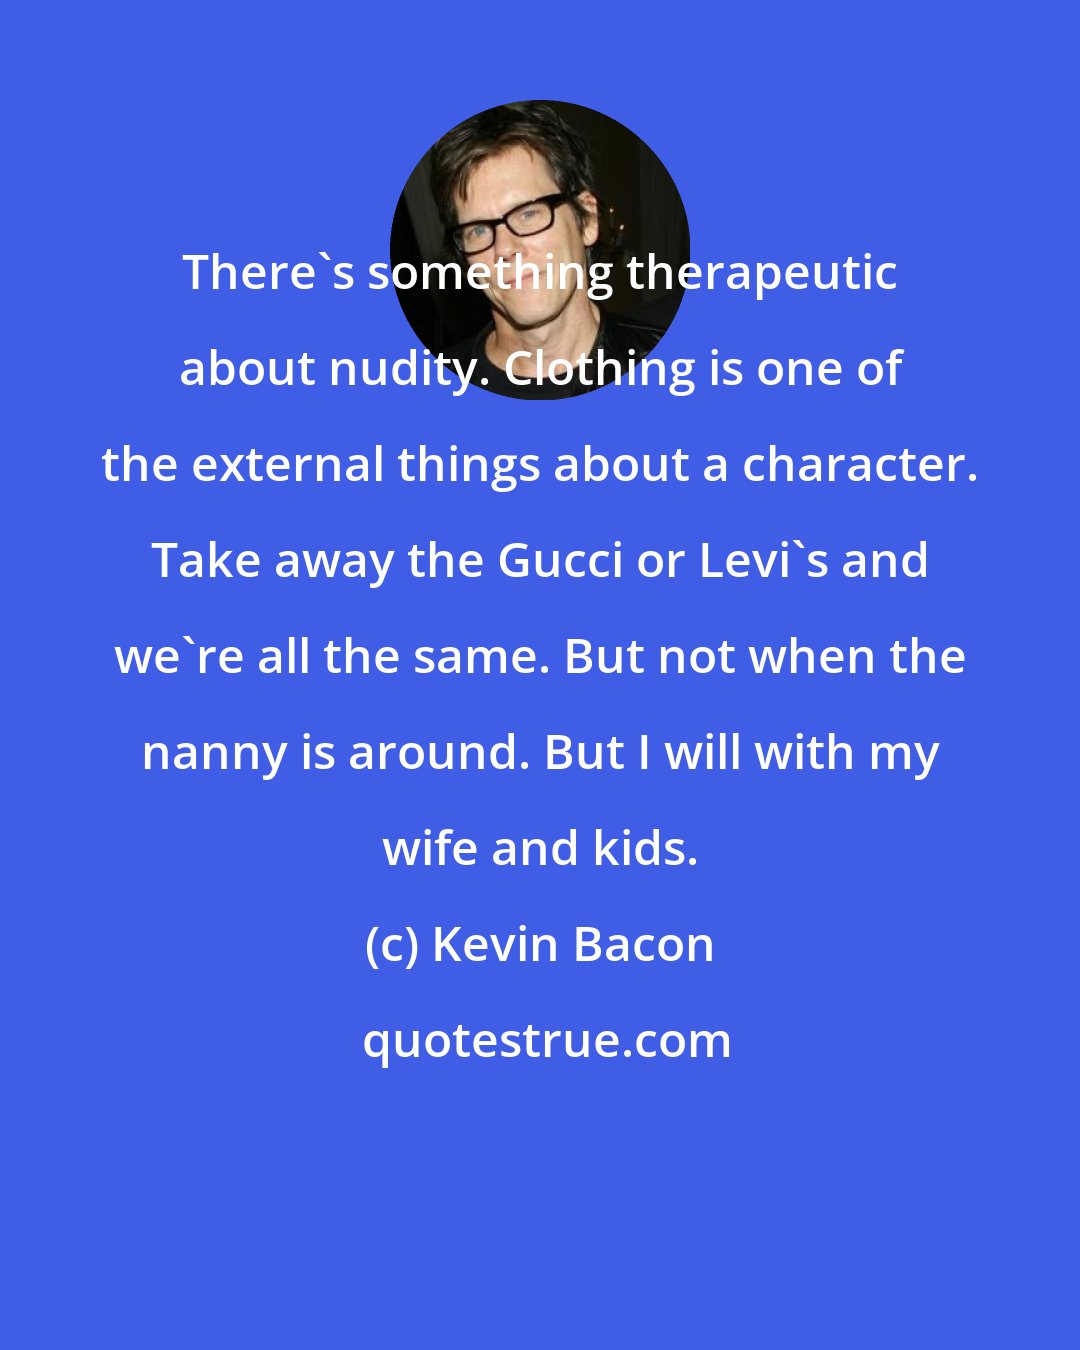 Kevin Bacon: There's something therapeutic about nudity. Clothing is one of the external things about a character. Take away the Gucci or Levi's and we're all the same. But not when the nanny is around. But I will with my wife and kids.